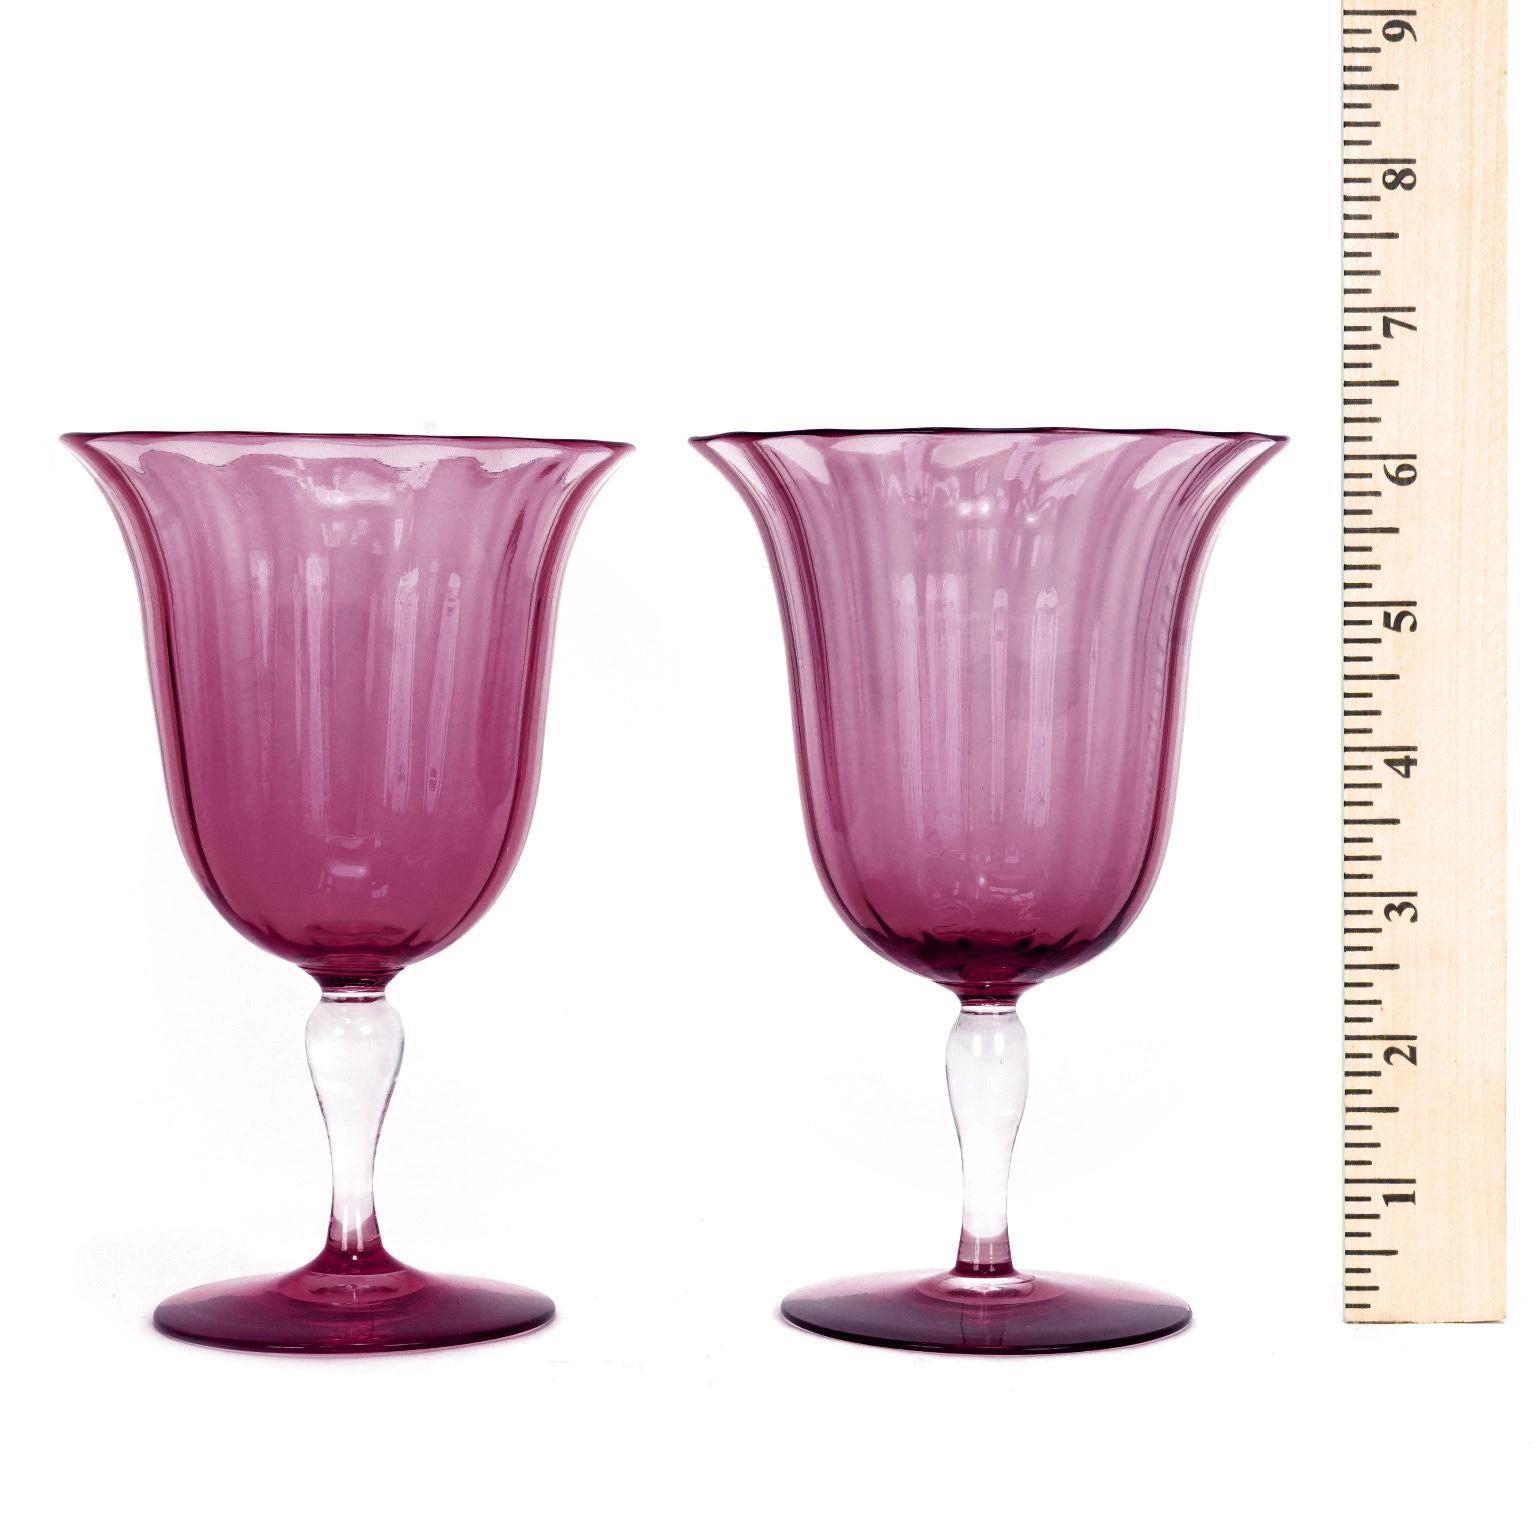 Early 20th Century Stunning and Rare 12 Steuben Optic Rib Amethyst Water Goblets